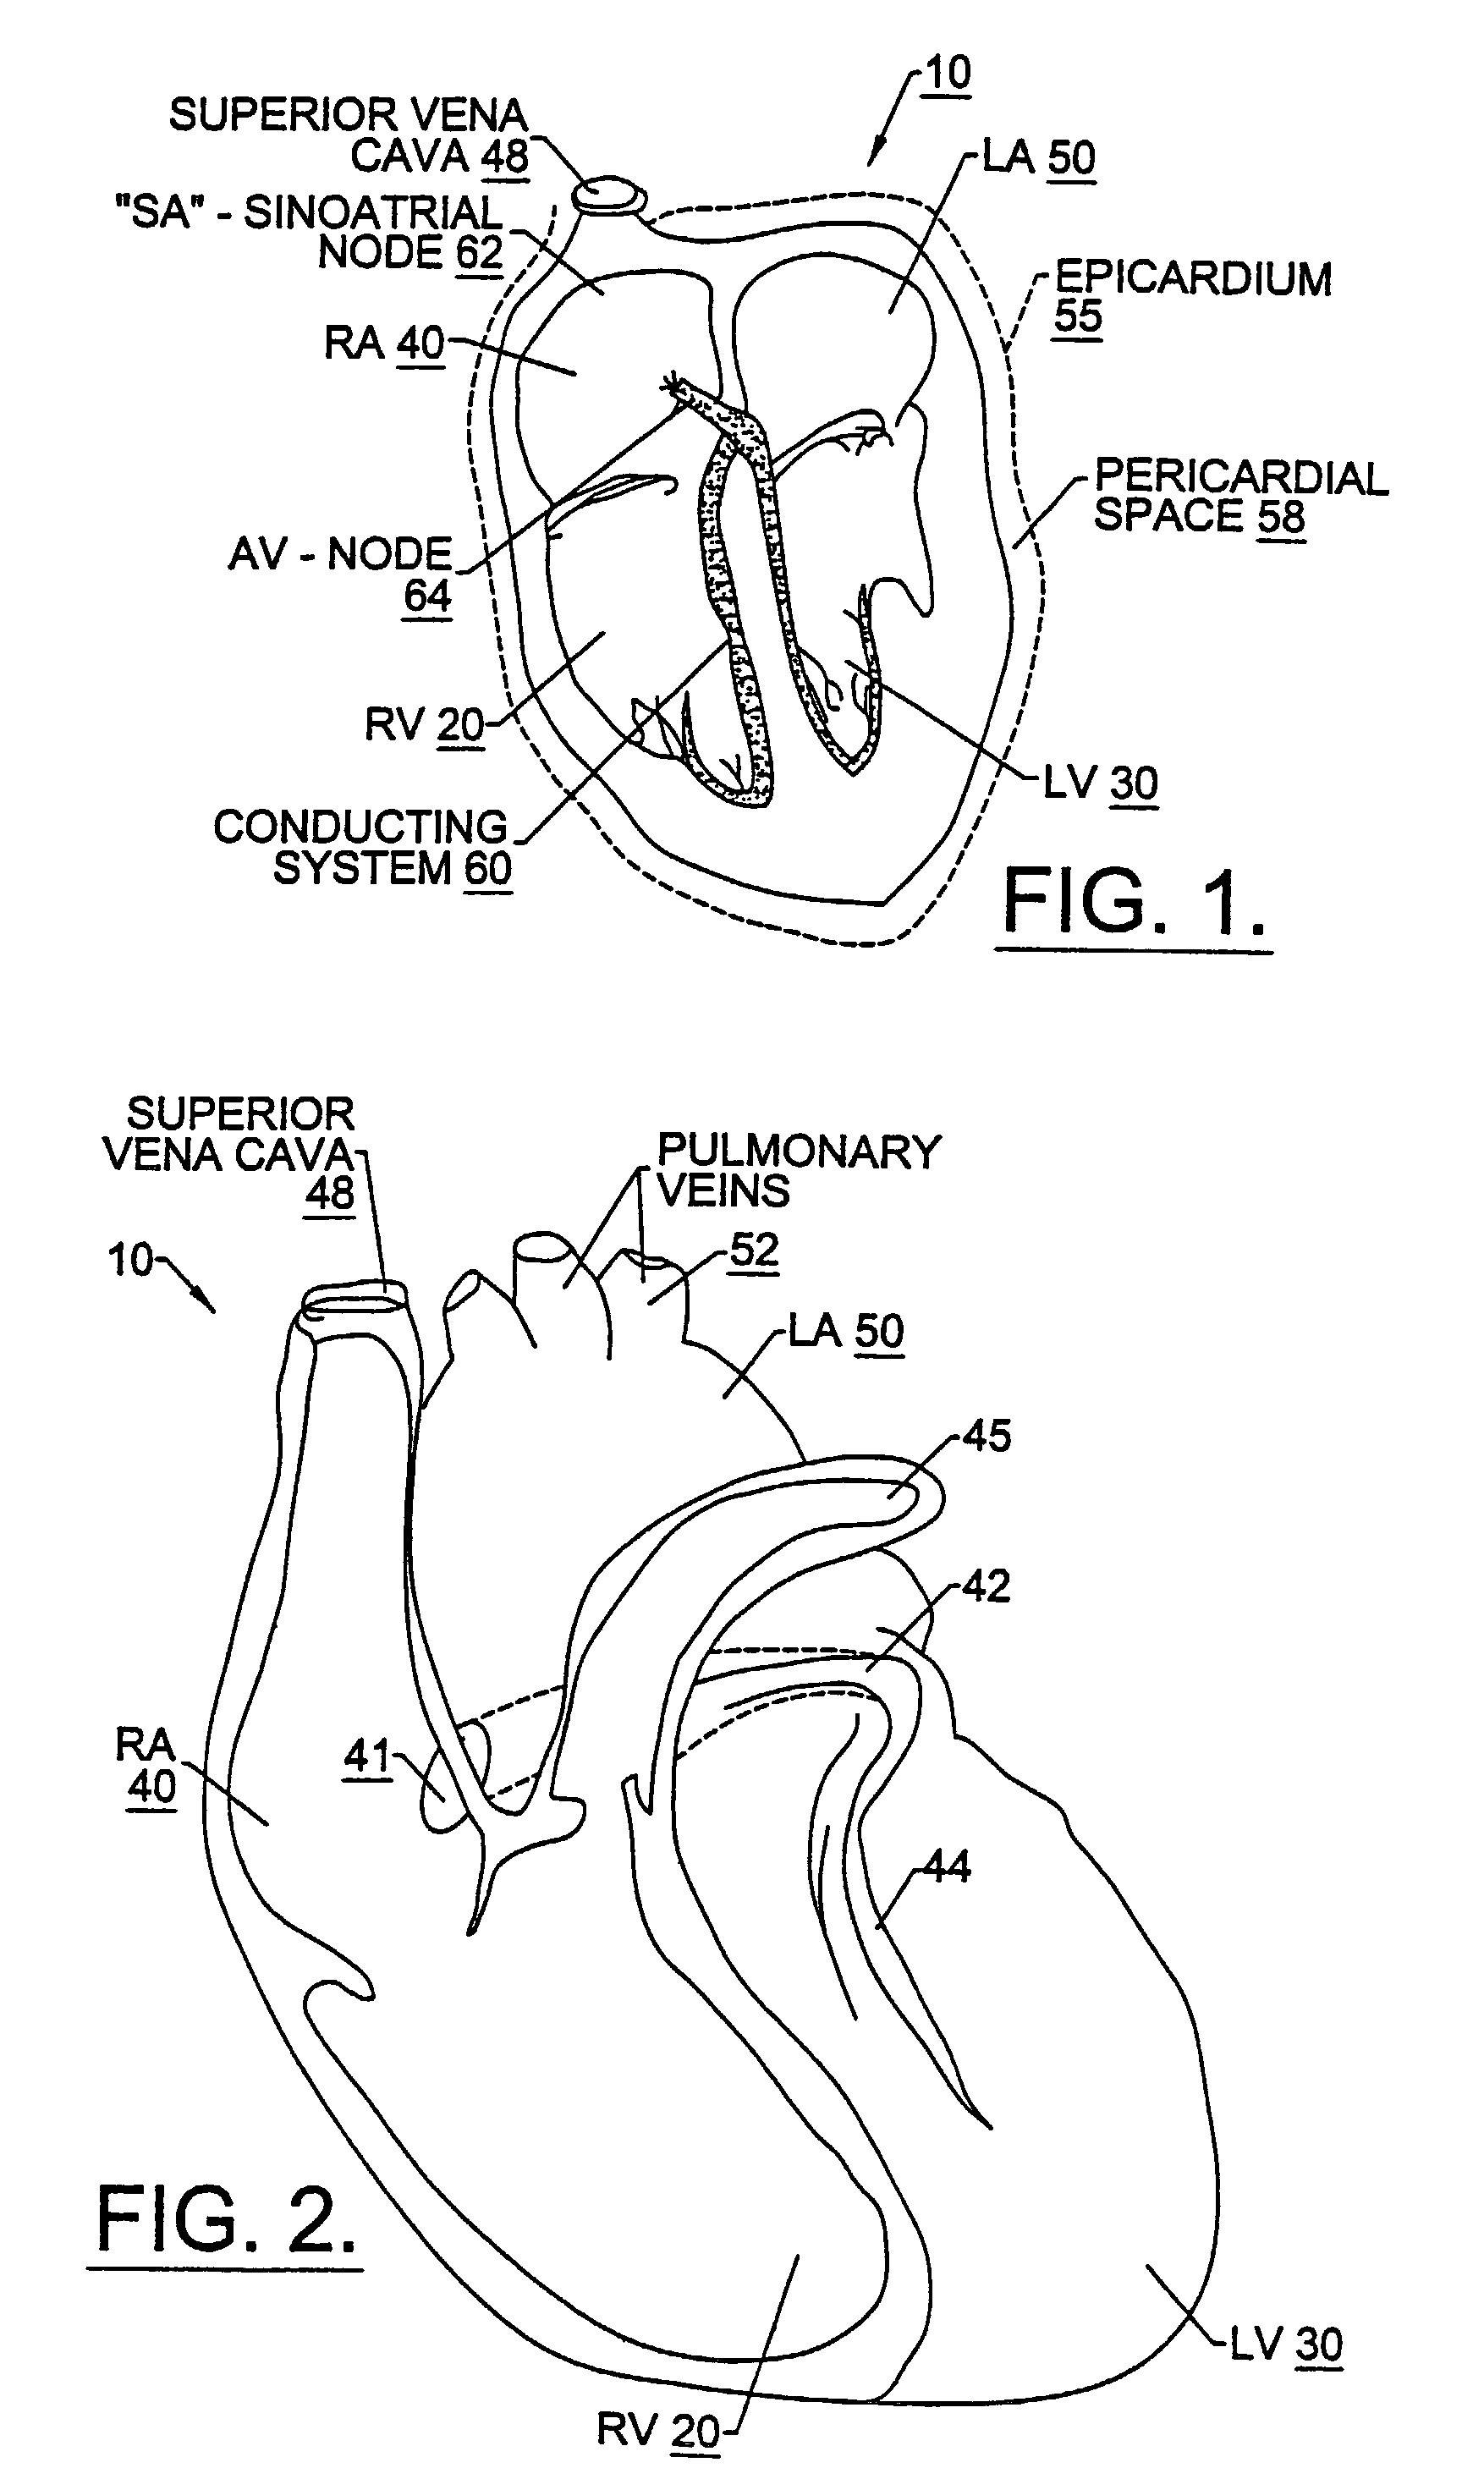 Post-defibrillation pacing methods and devices